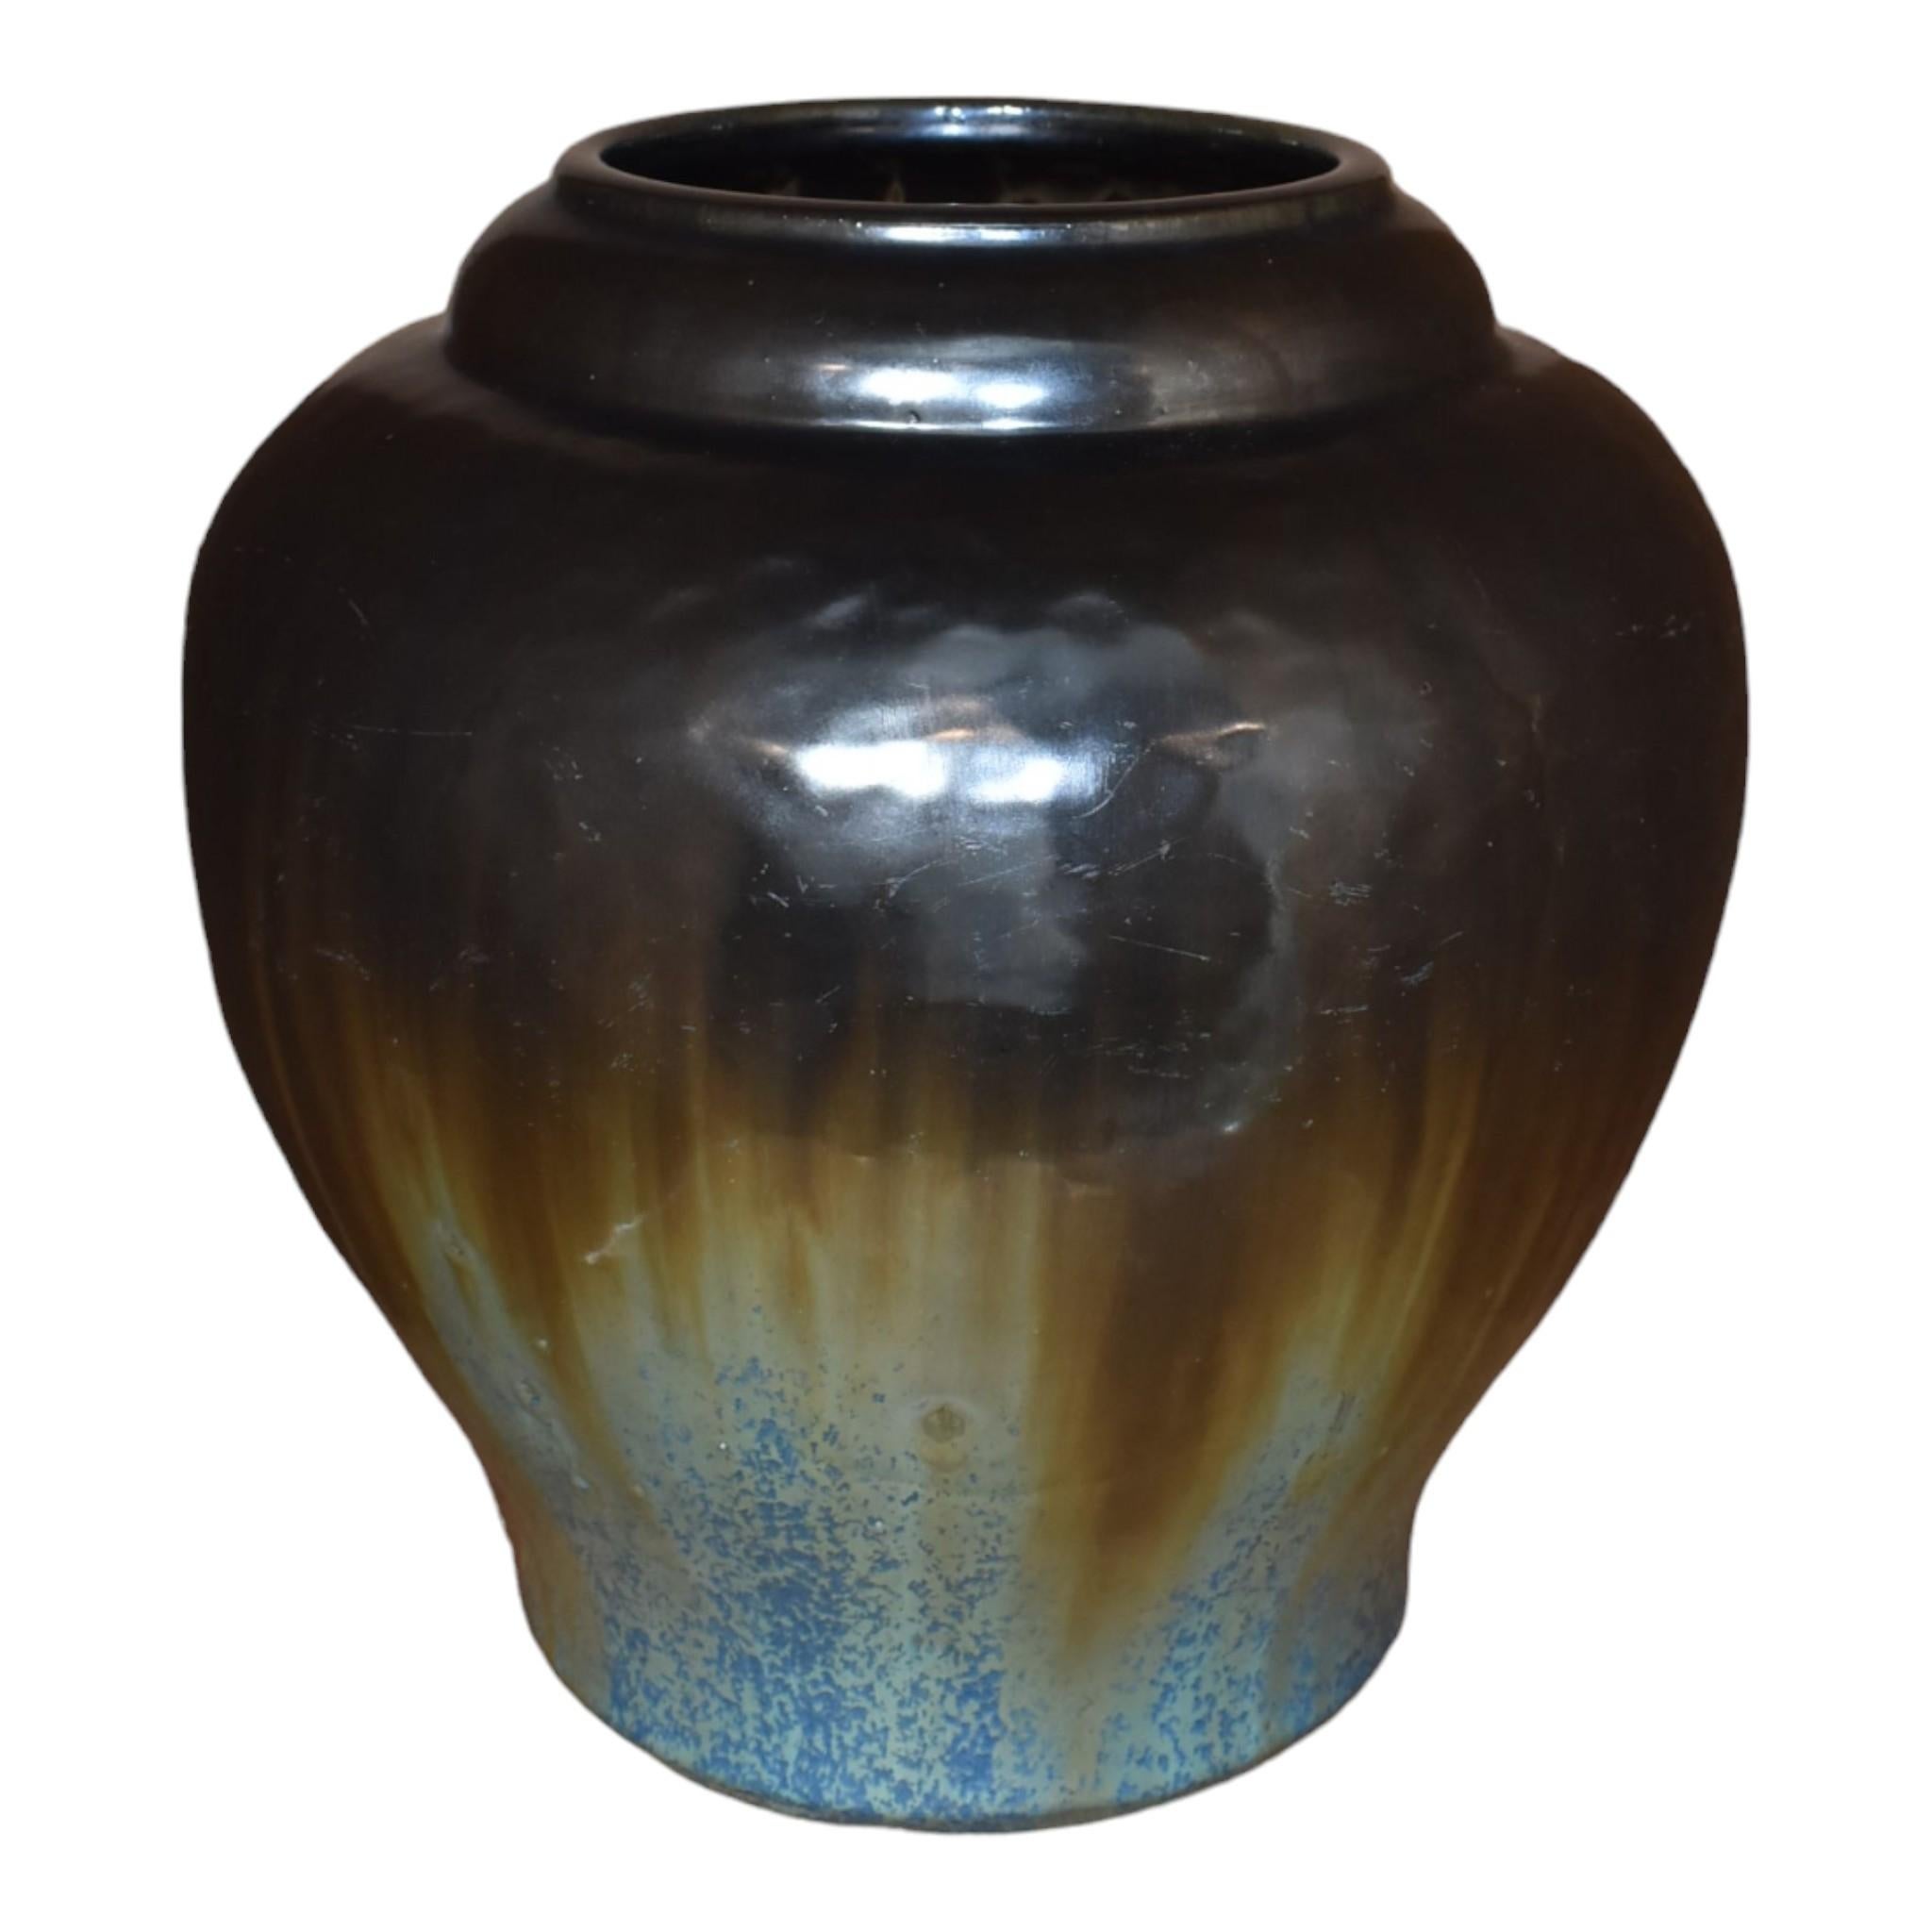 Fulper 1917-23 Arts And Crafts Pottery Black Blue Flambe Glaze Ceramic Vase 591
Massive and striking form with wonderful gun metal glaze flowing over a crystalline blue glaze.
Excellent condition. No chips, cracks, damage or repair of any kind.